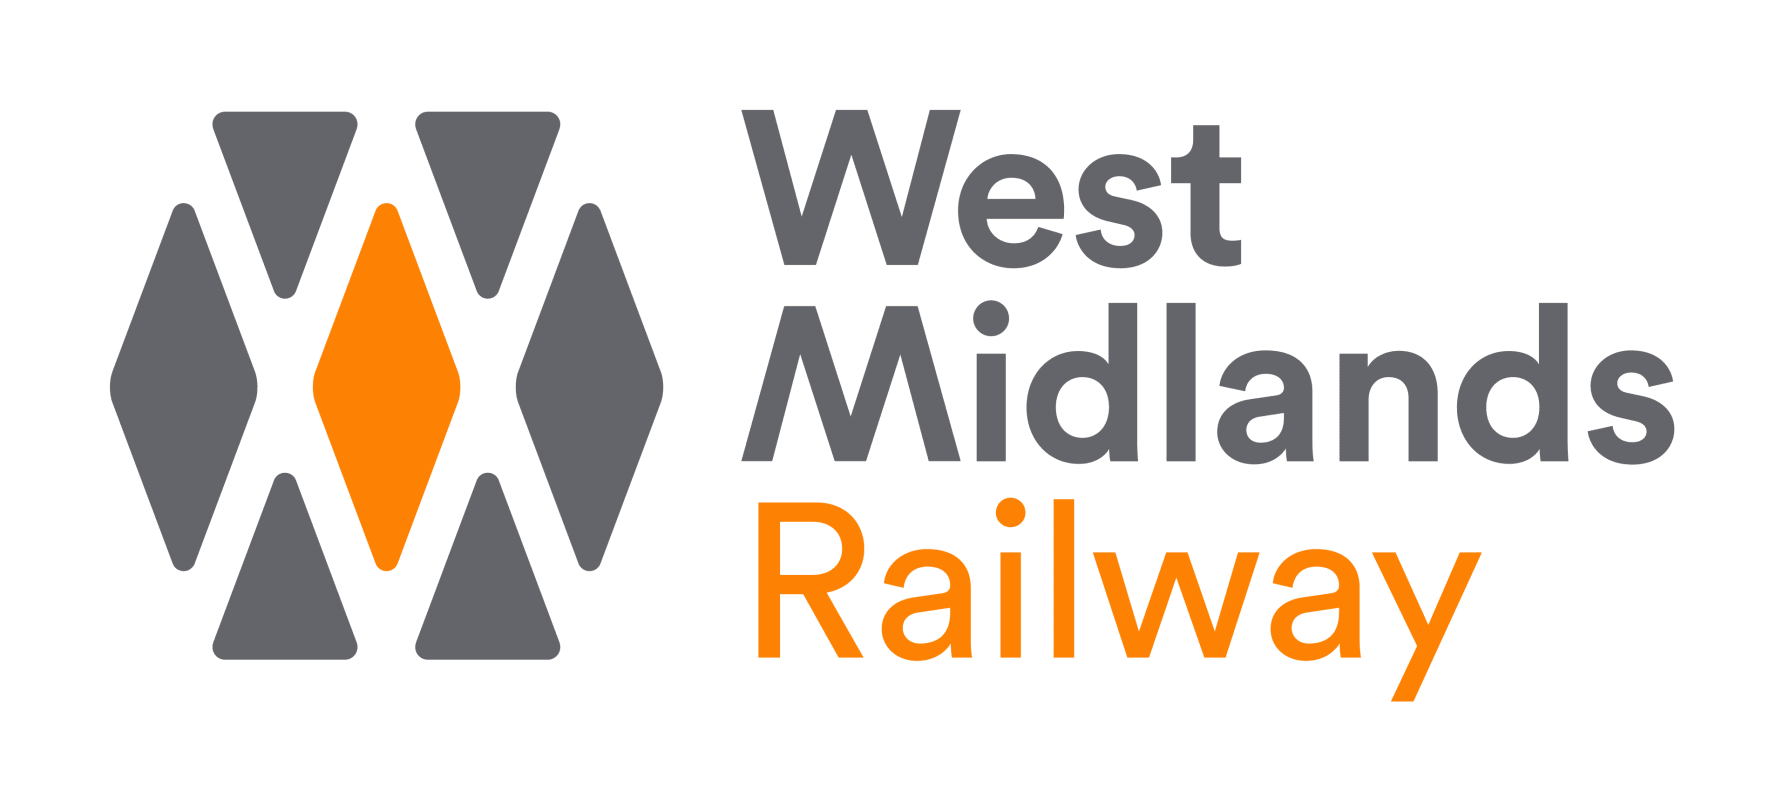 Additional carriages in service between Birmingham and Worcester / Hereford